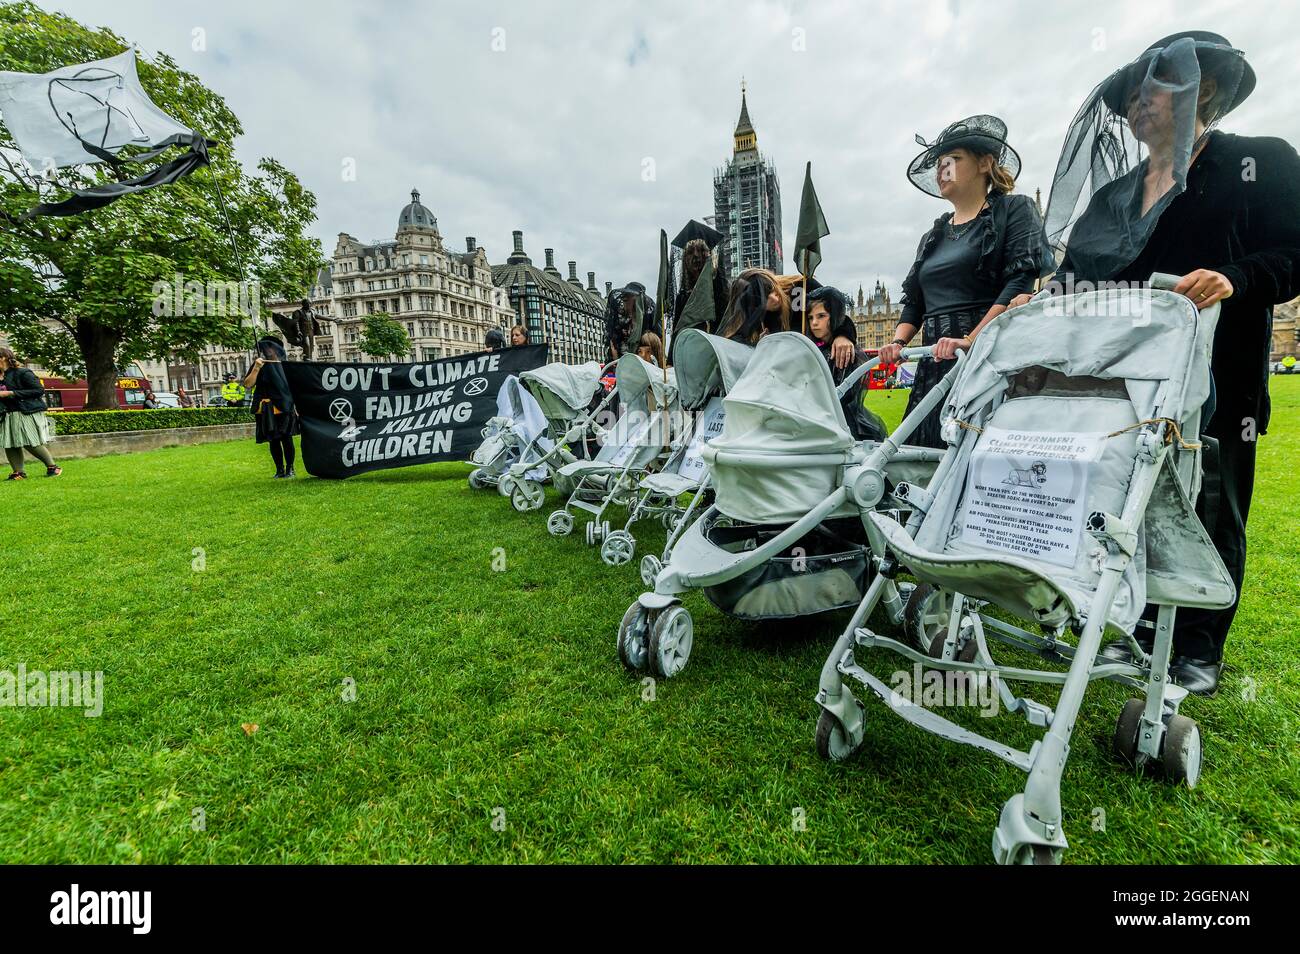 London, UK. 31st Aug, 2021. The white prams were pushed b rebels in black mourning outfits as they call for an end to the pollution that affects the health of so many chidren around the world. Extinction Rebellion continues its two weeks with a prams protest in Parliament Square and Whitehall, under the overalll Impossible Rebellion name. Credit: Guy Bell/Alamy Live News Stock Photo